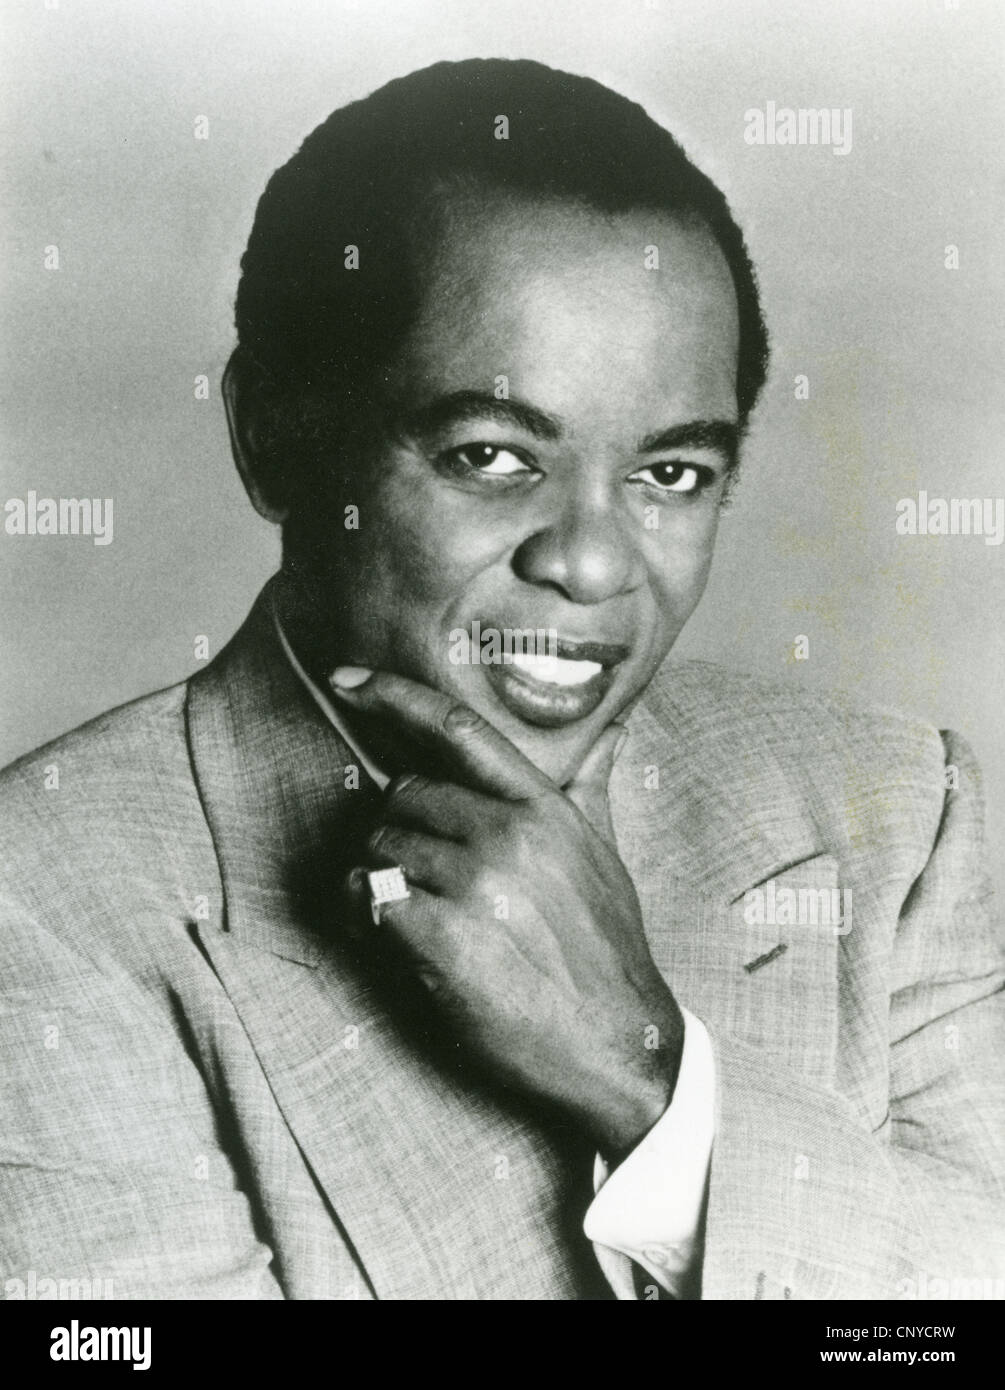 LOU RAWLS (1933-2006) Promotional photo of US singer about 1980 Stock Photo